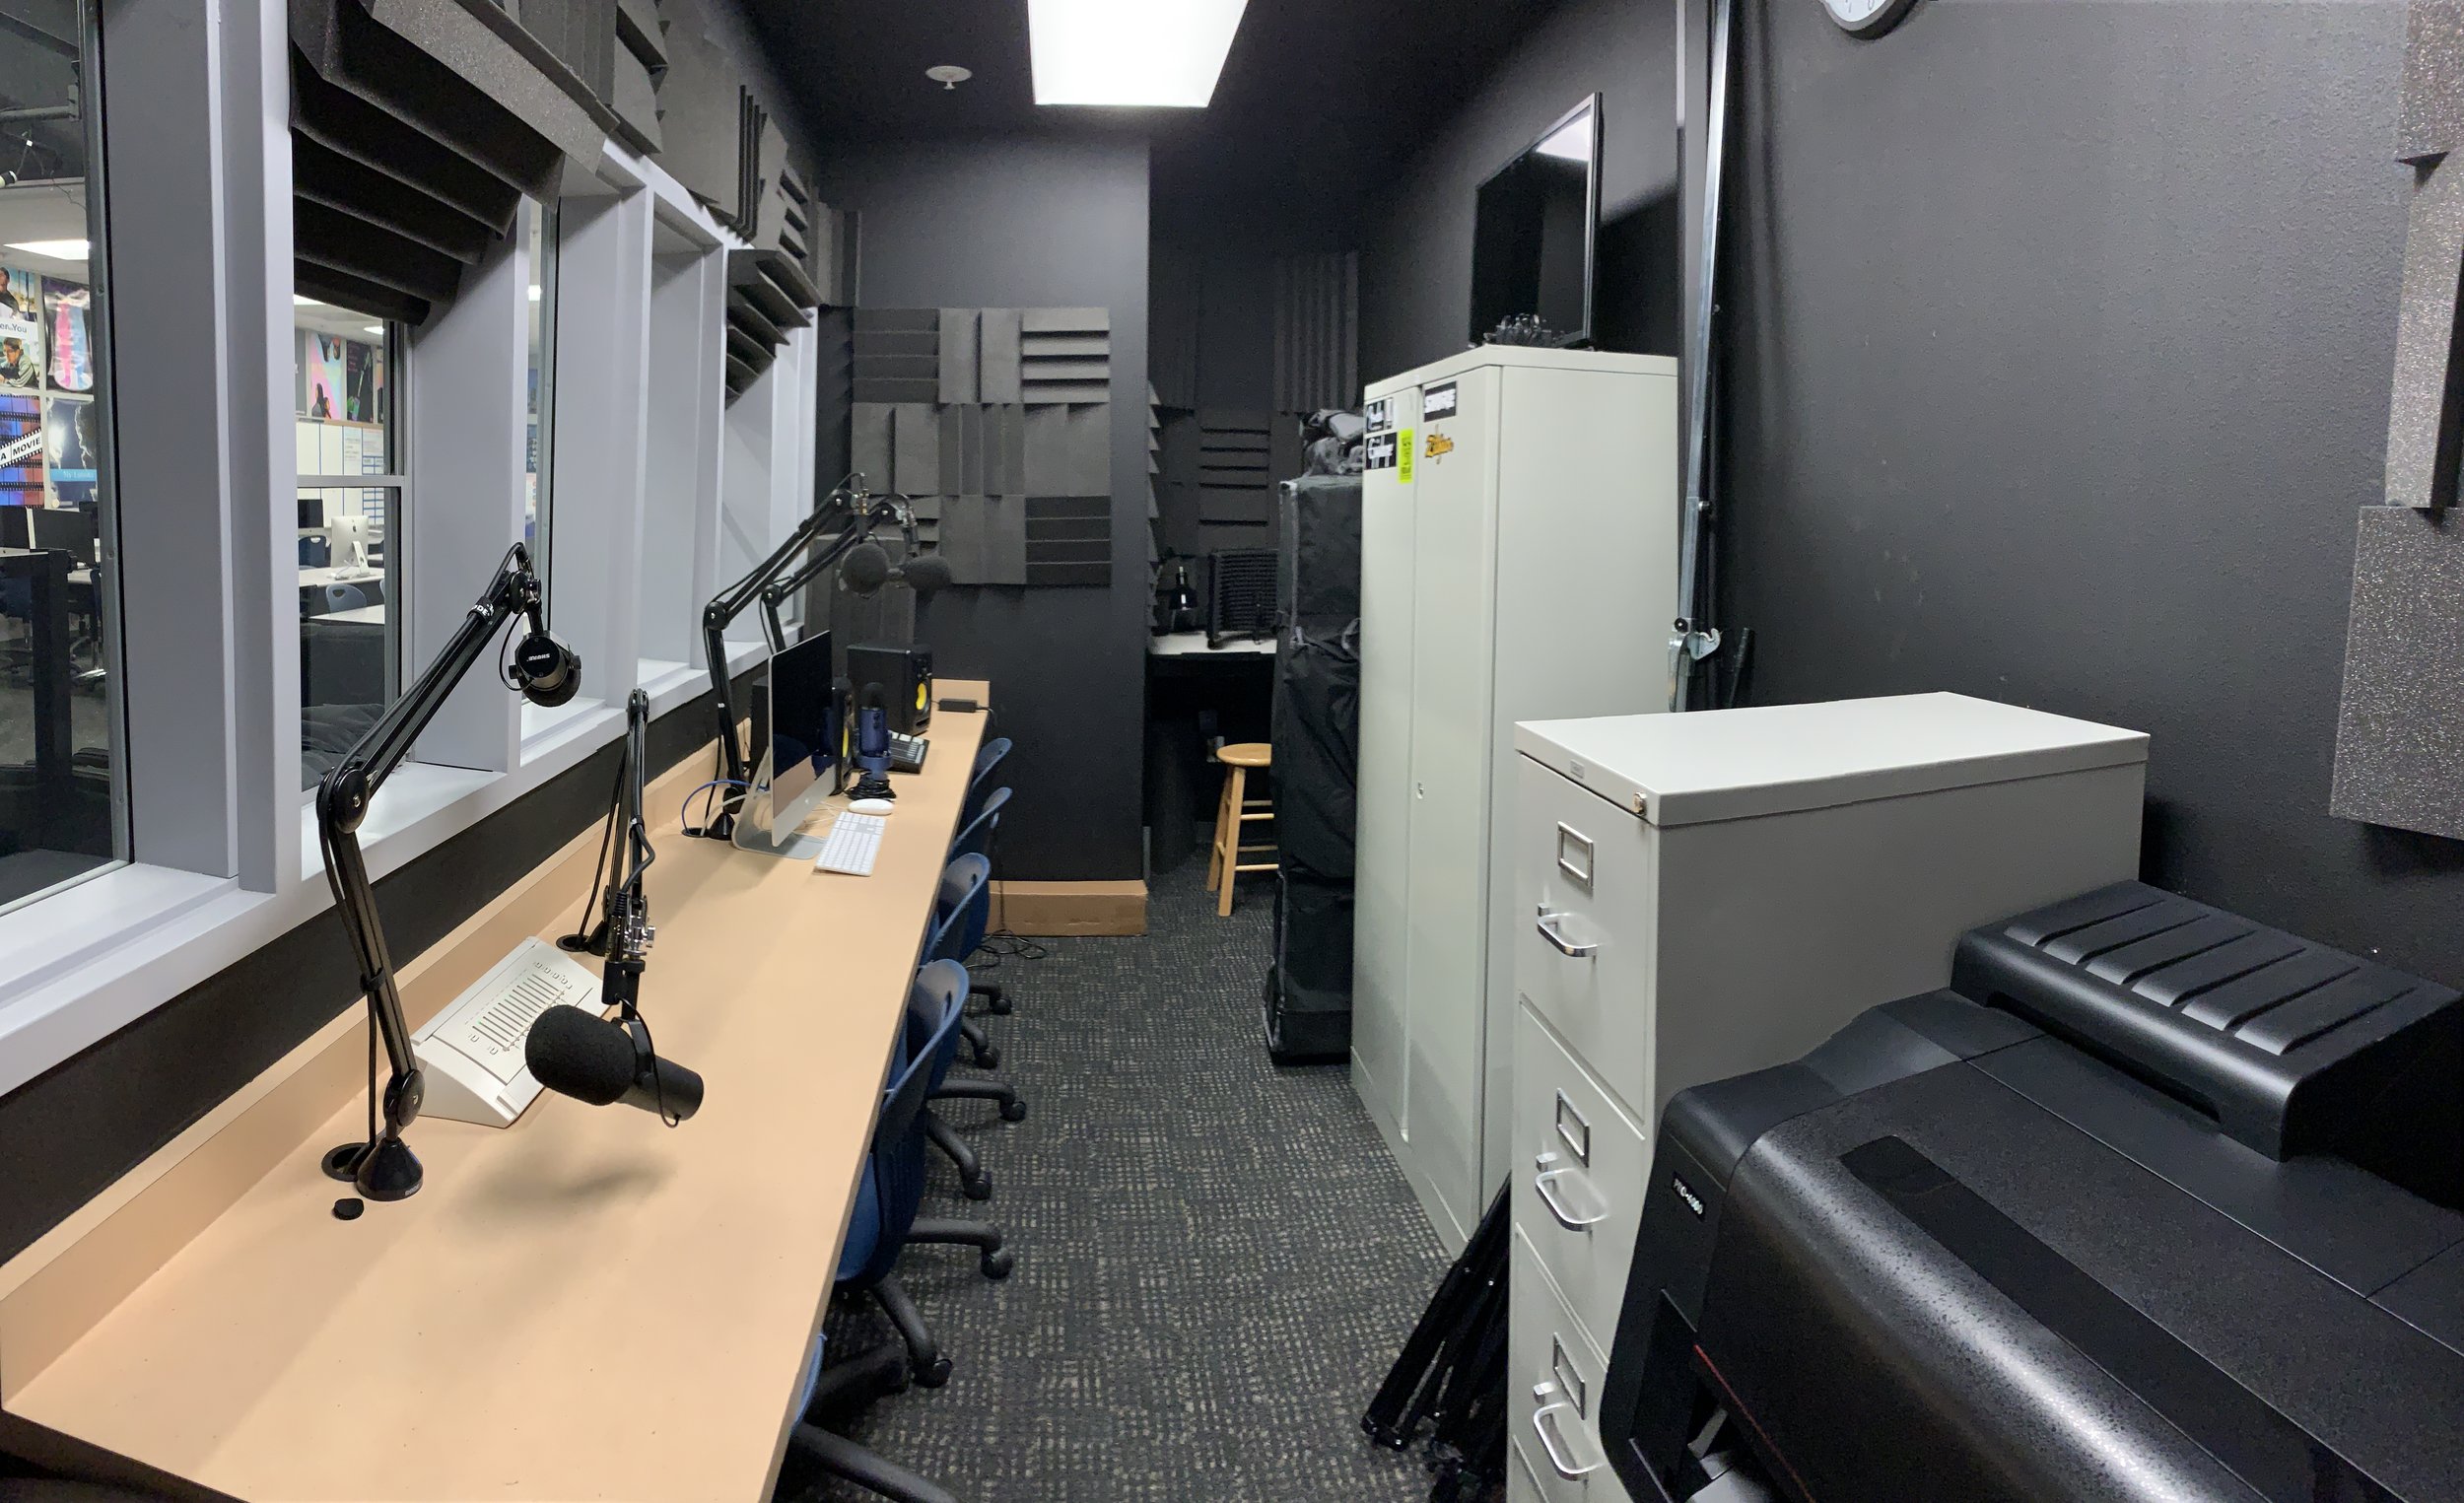  The podcast studio also had a giant large format printer in it (not that you want want to run a giant printer when recording audio…) 